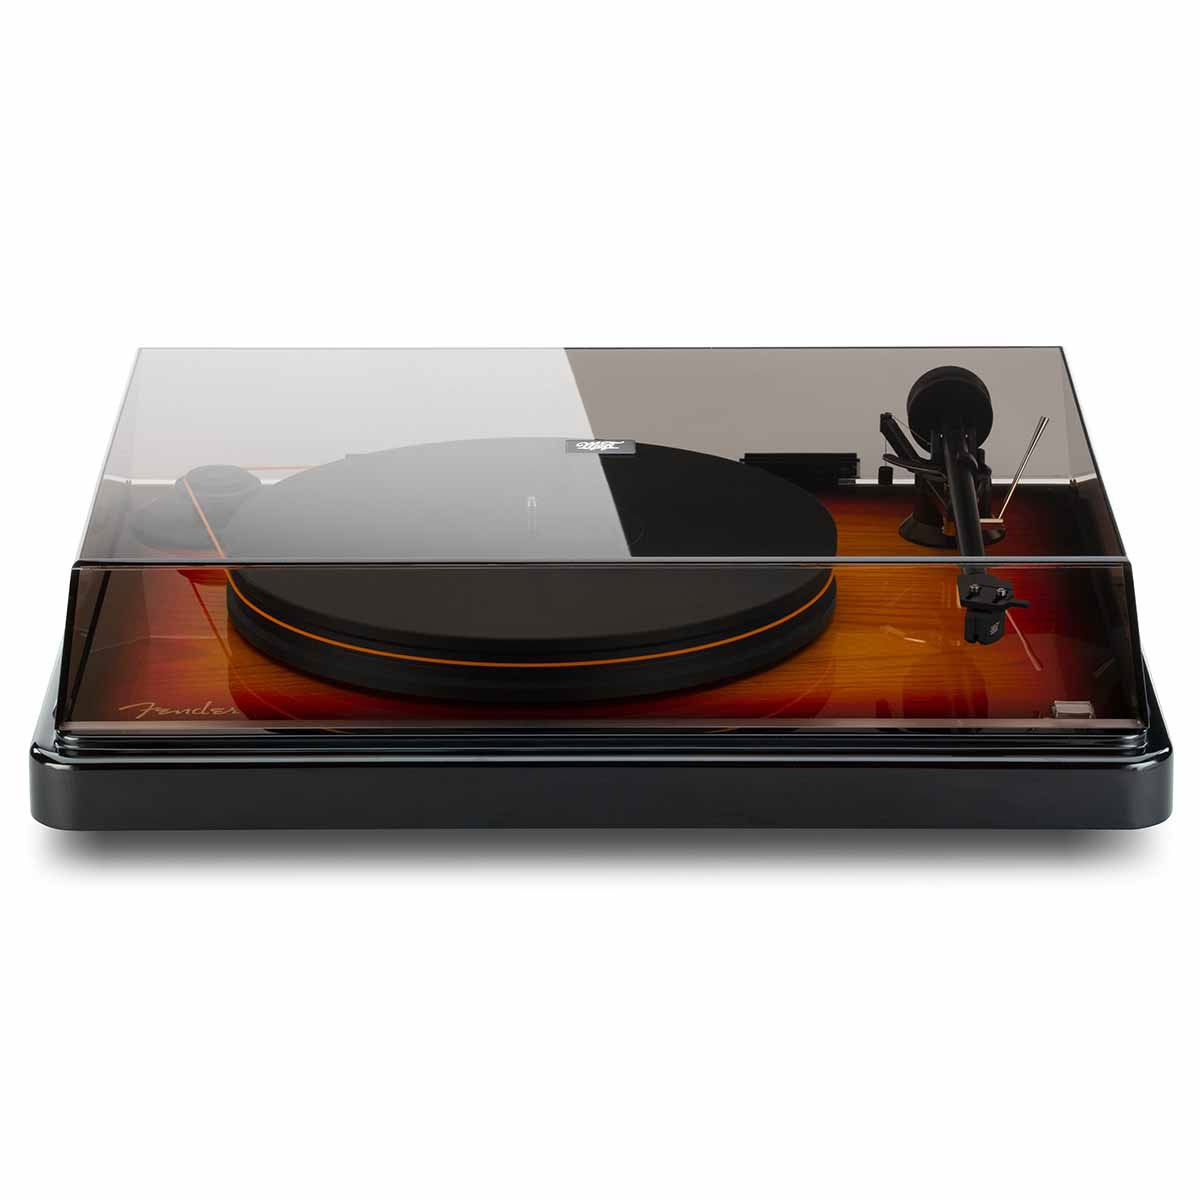 MoFi Fender PrecisionDeck Turntable, Sunburst, front view with dustcover attached